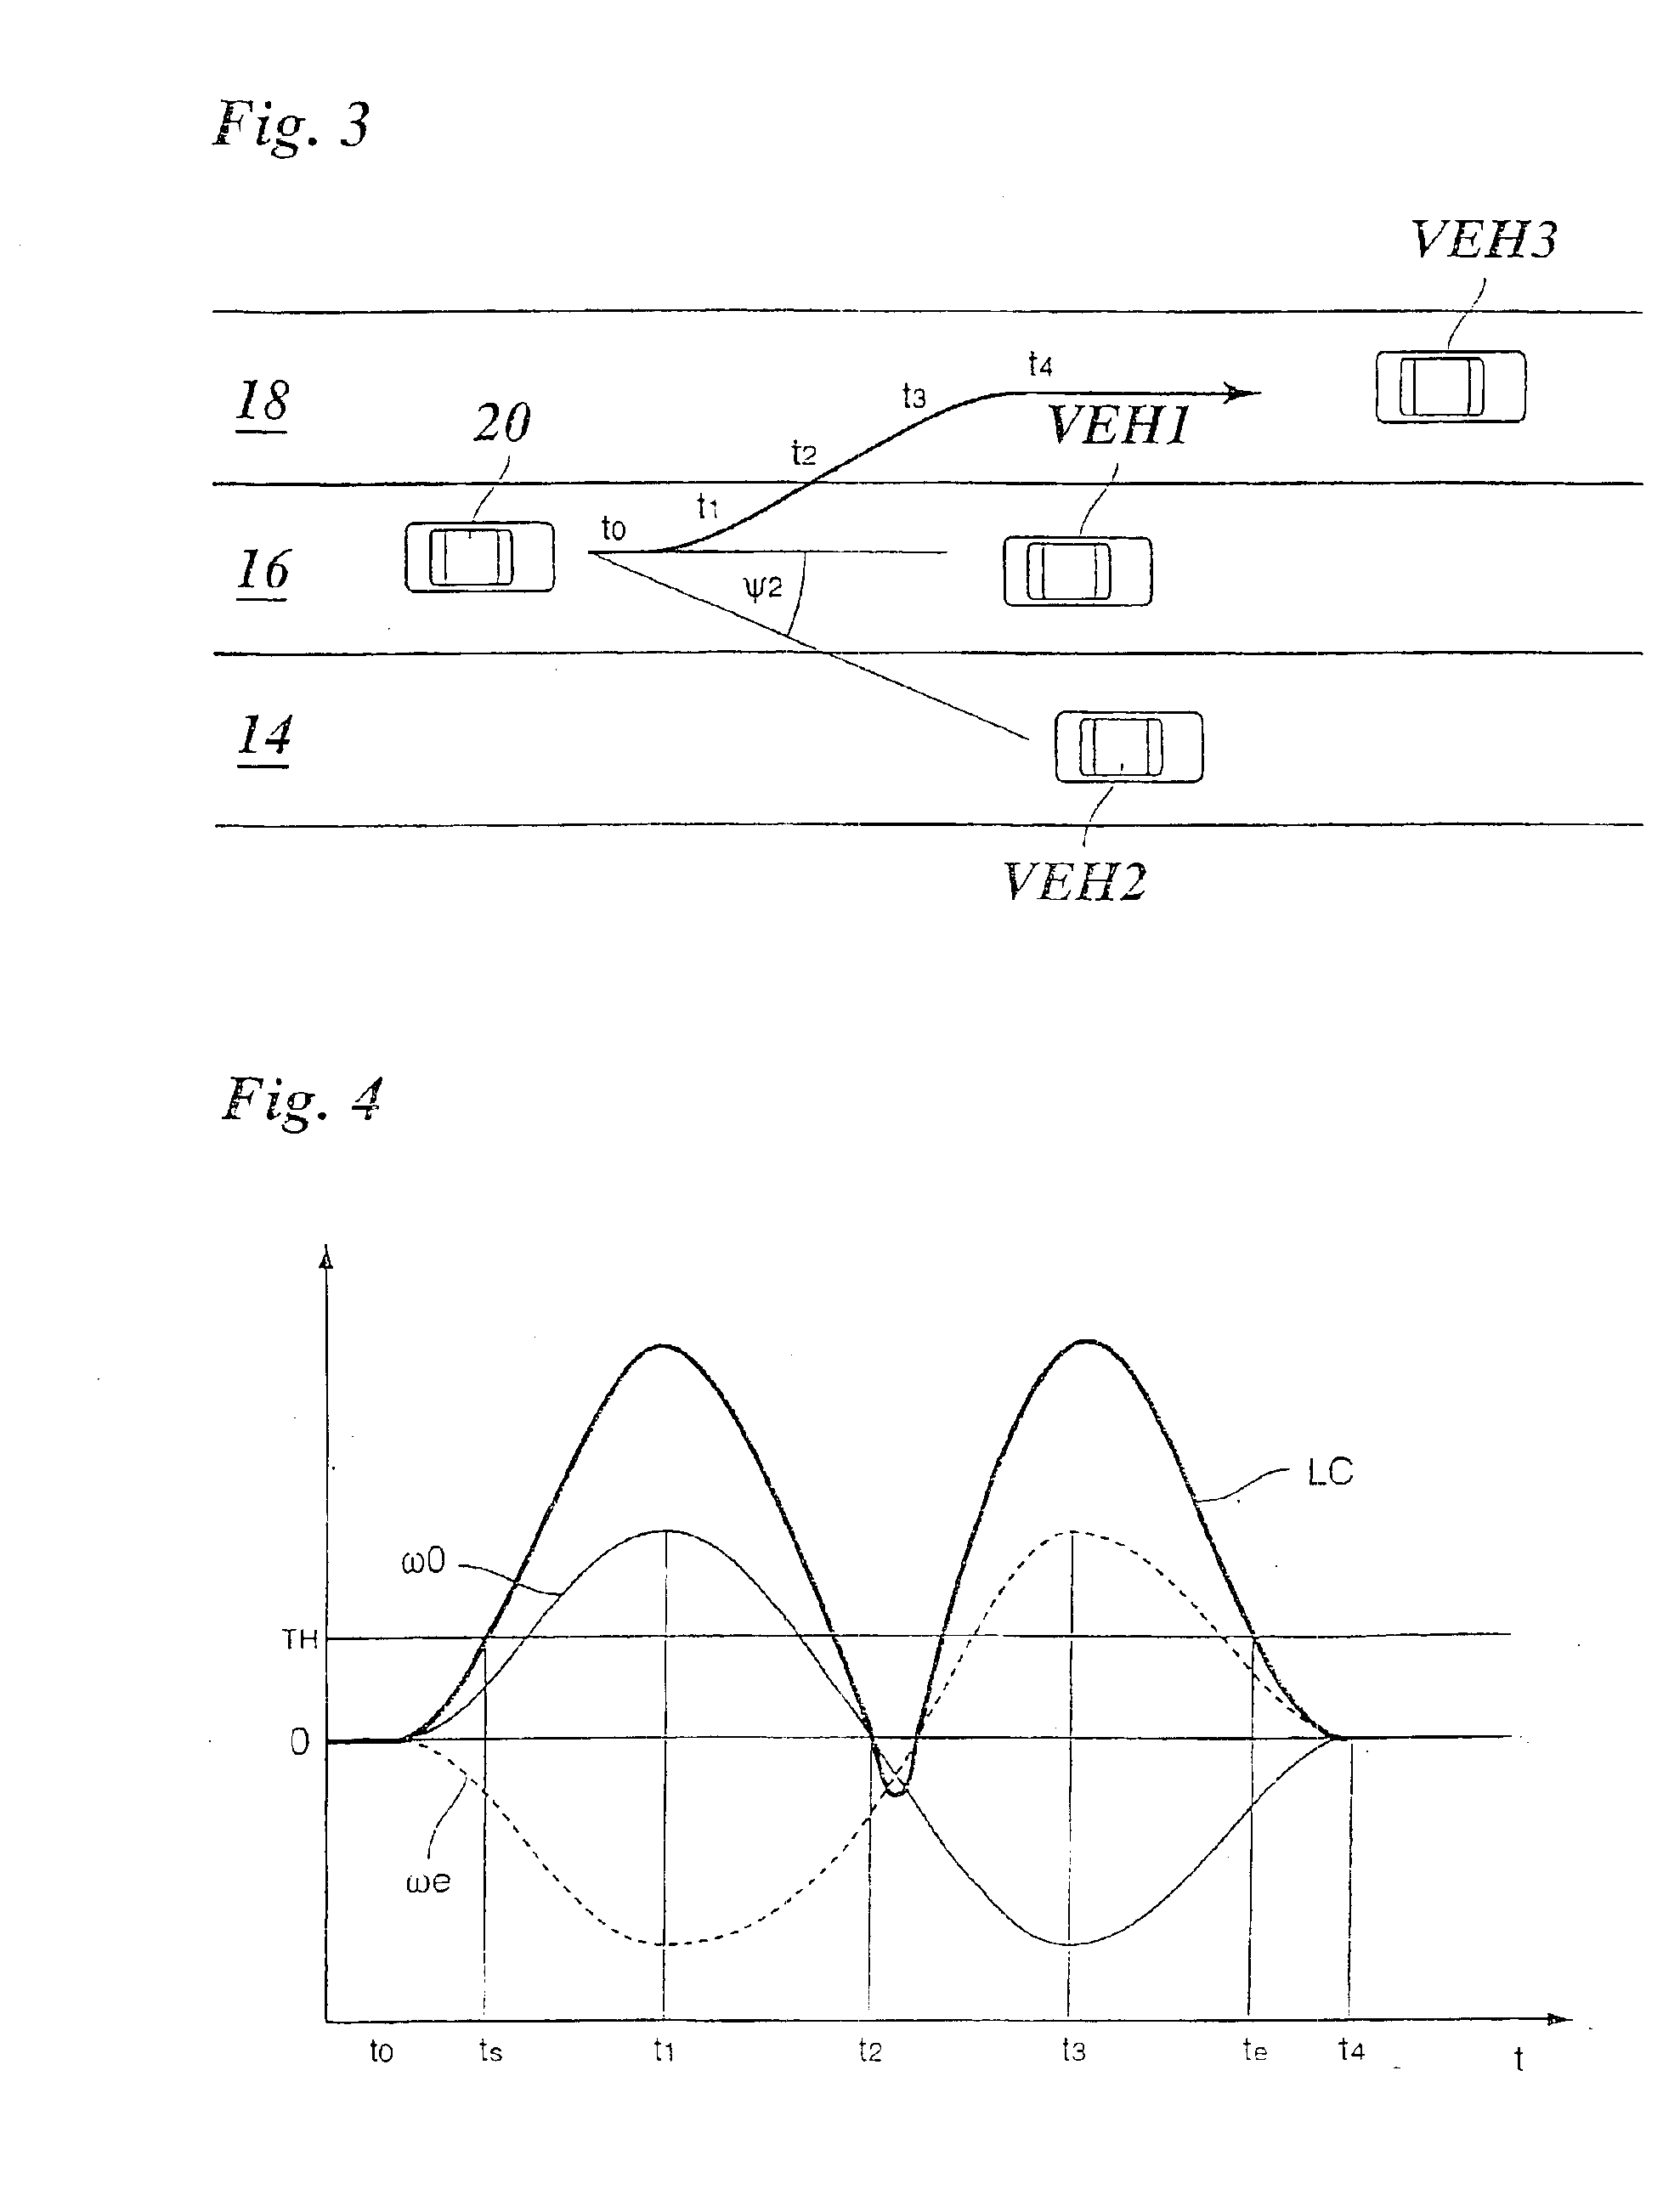 Method for recognizing a change in lane of a vehicle